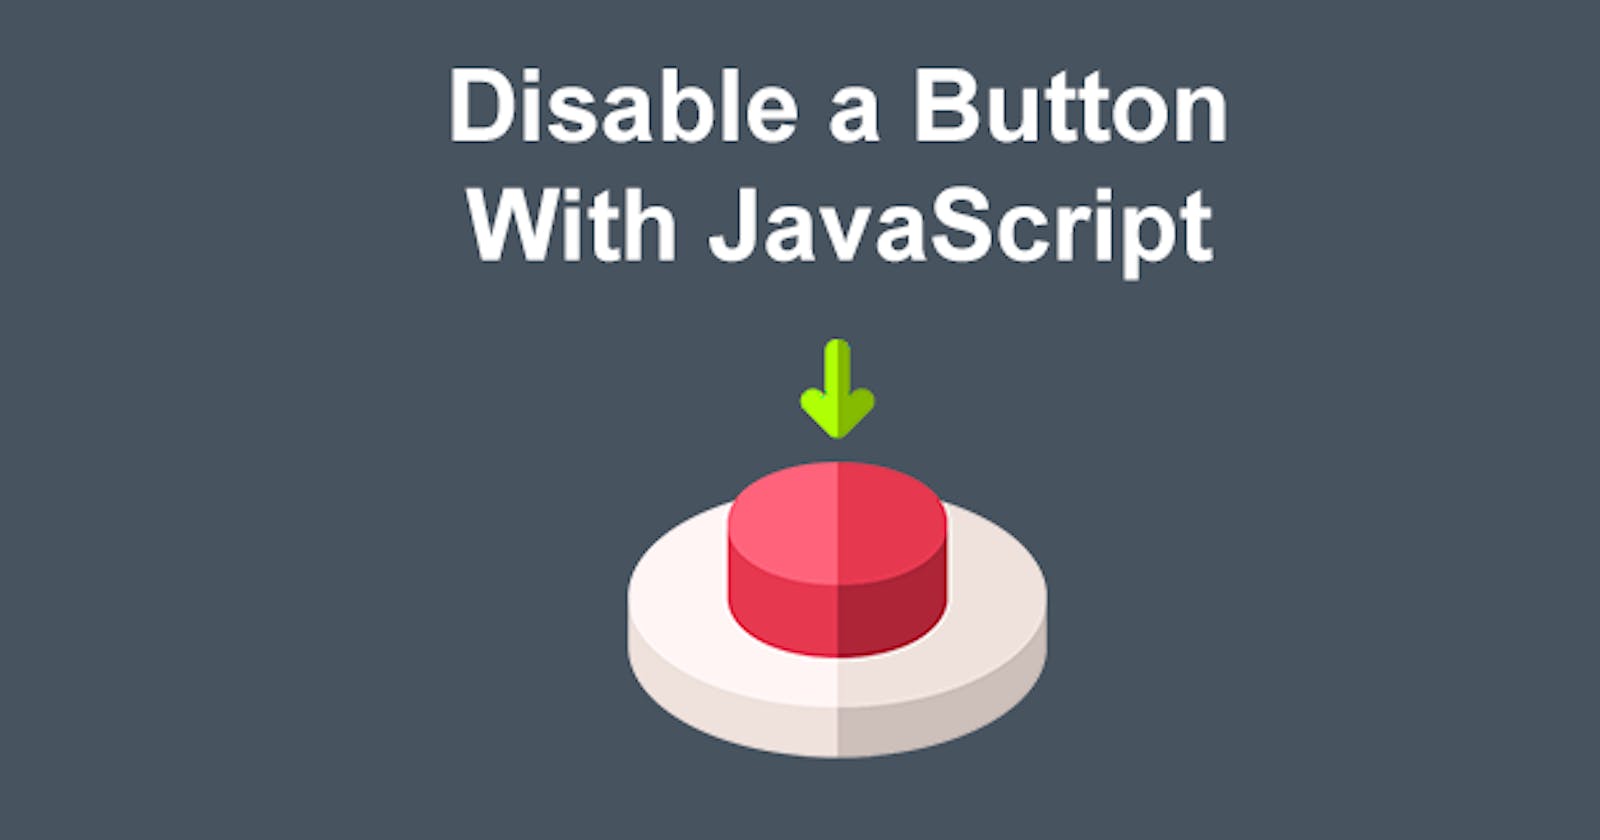 [JavaScript] Tutorial for Disabling a Button Until the User Enters Something.